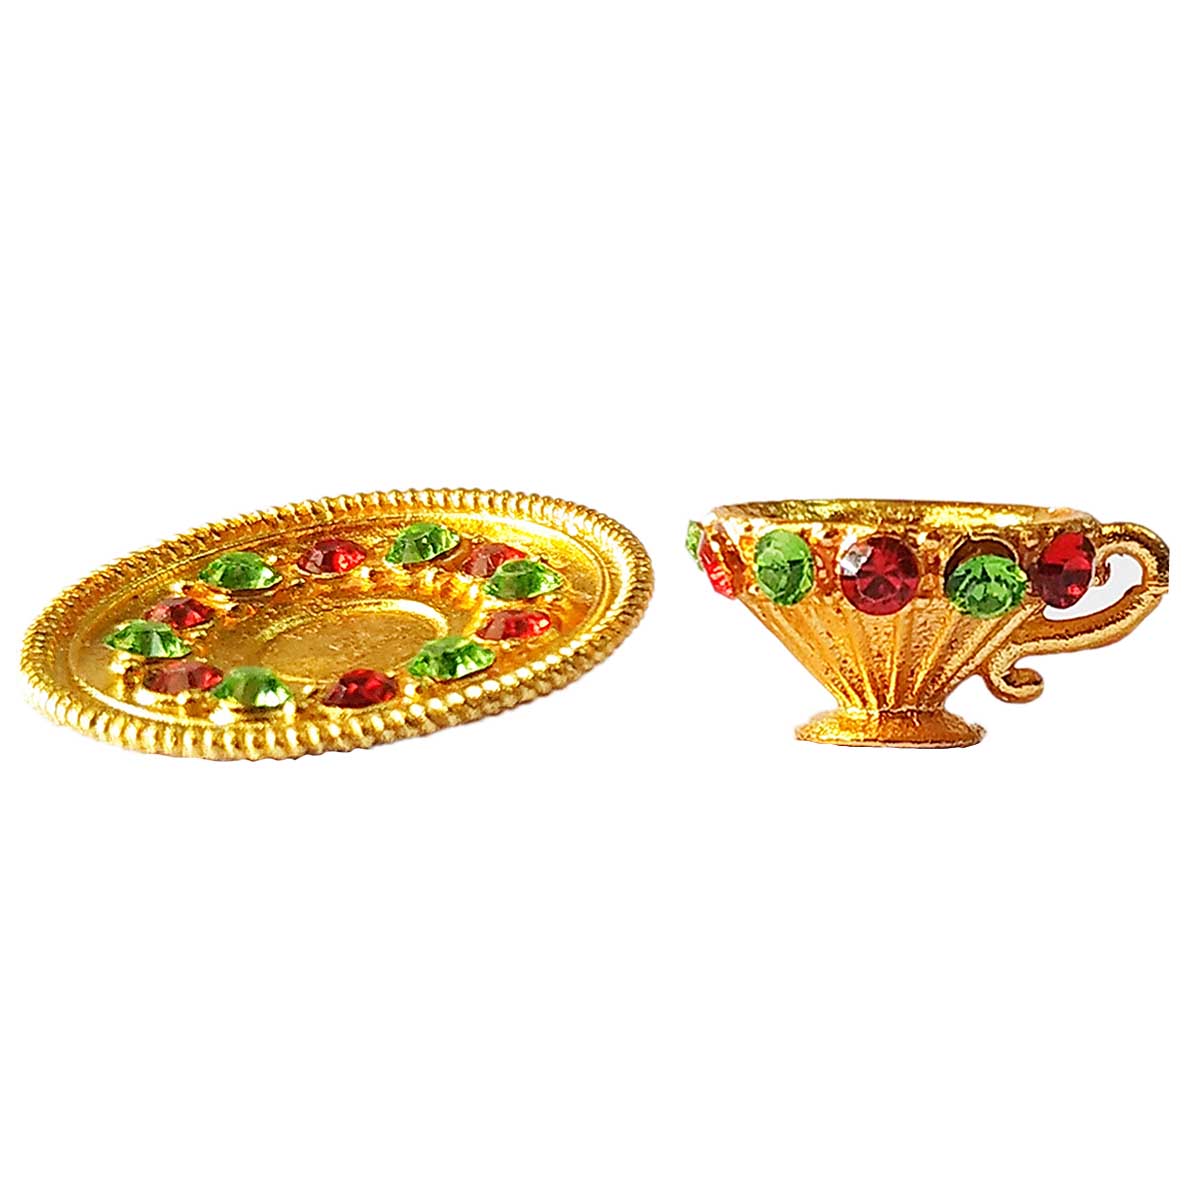 Stone Decorated Cup Plate set Toy for  Decoration